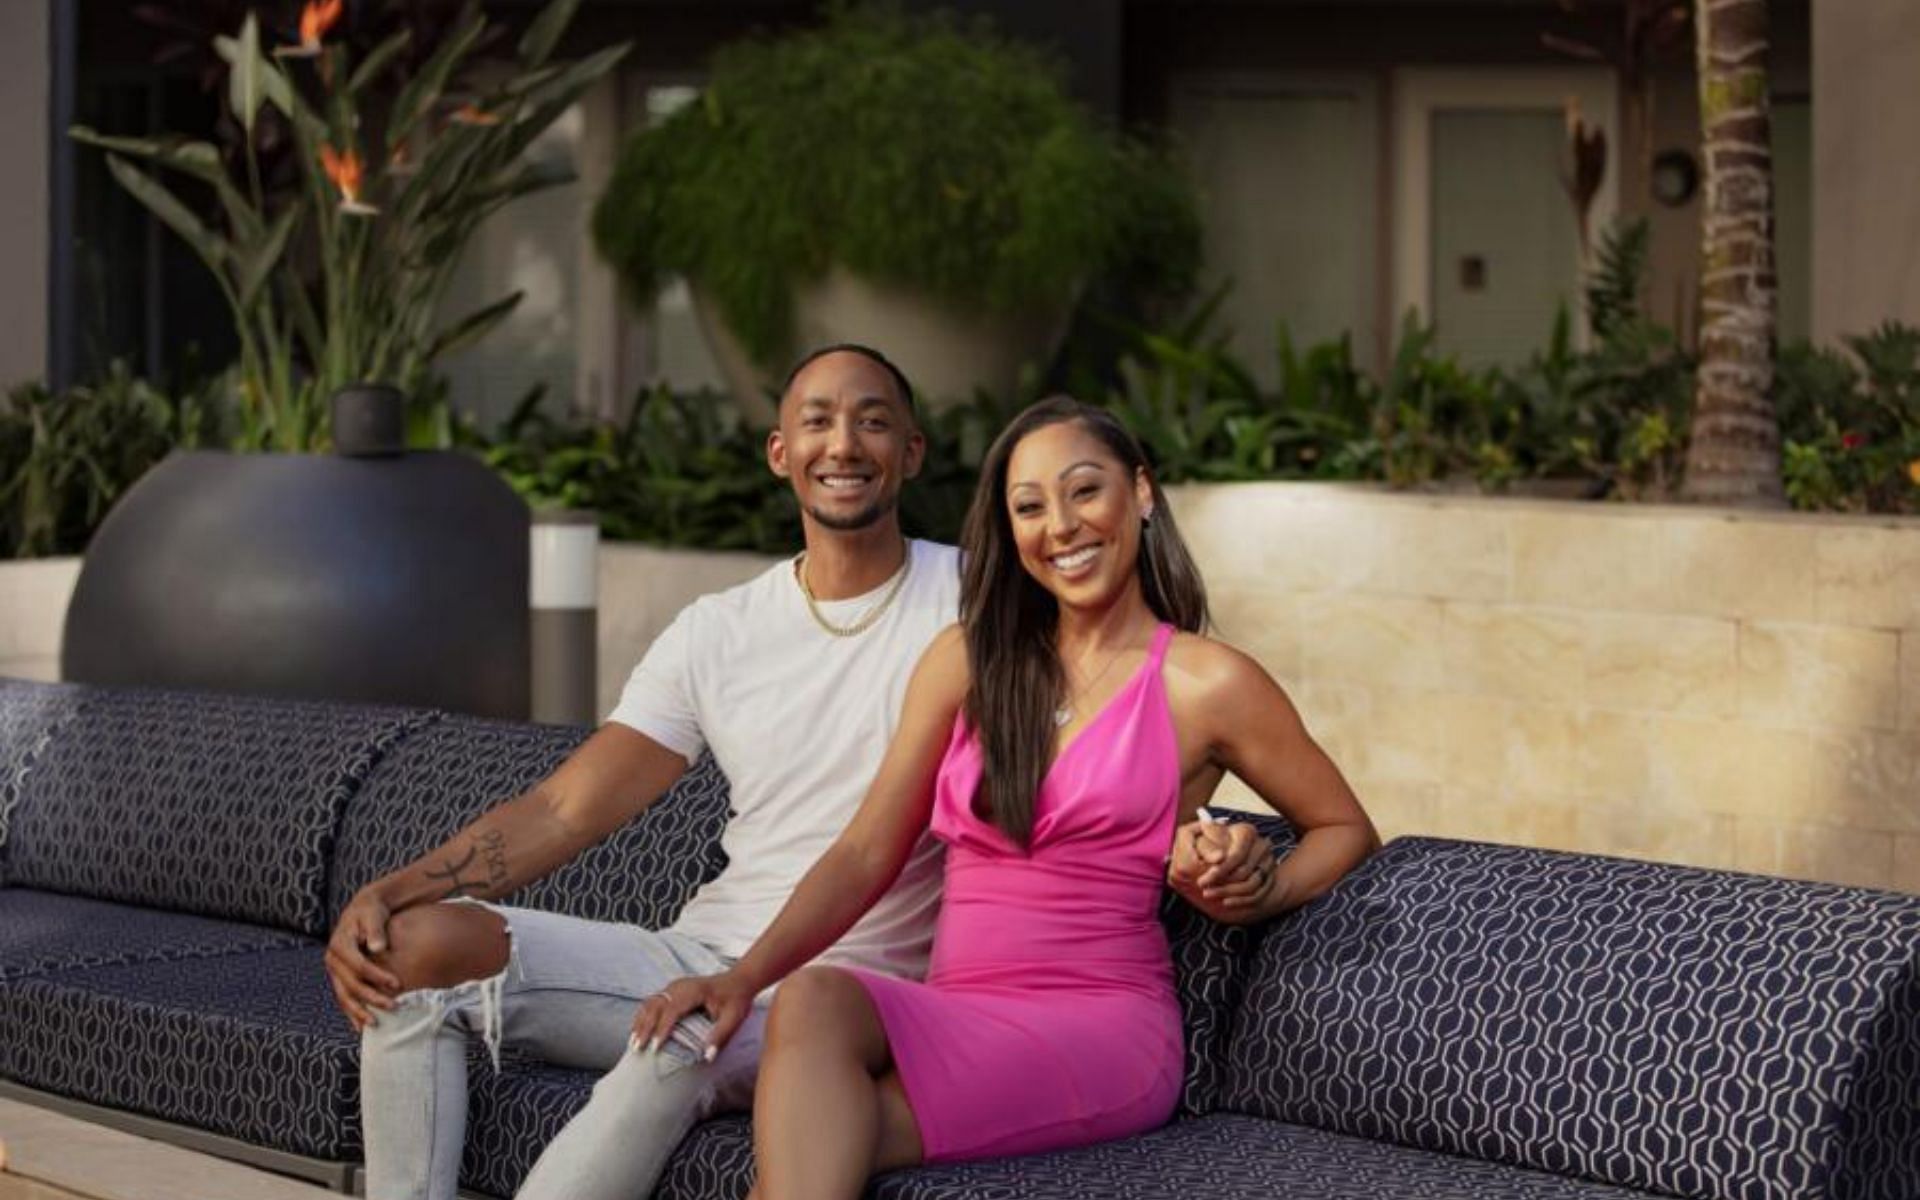 Married at First Sight fans believe Nate and Stacia resemble each other (Image via Lifetime)